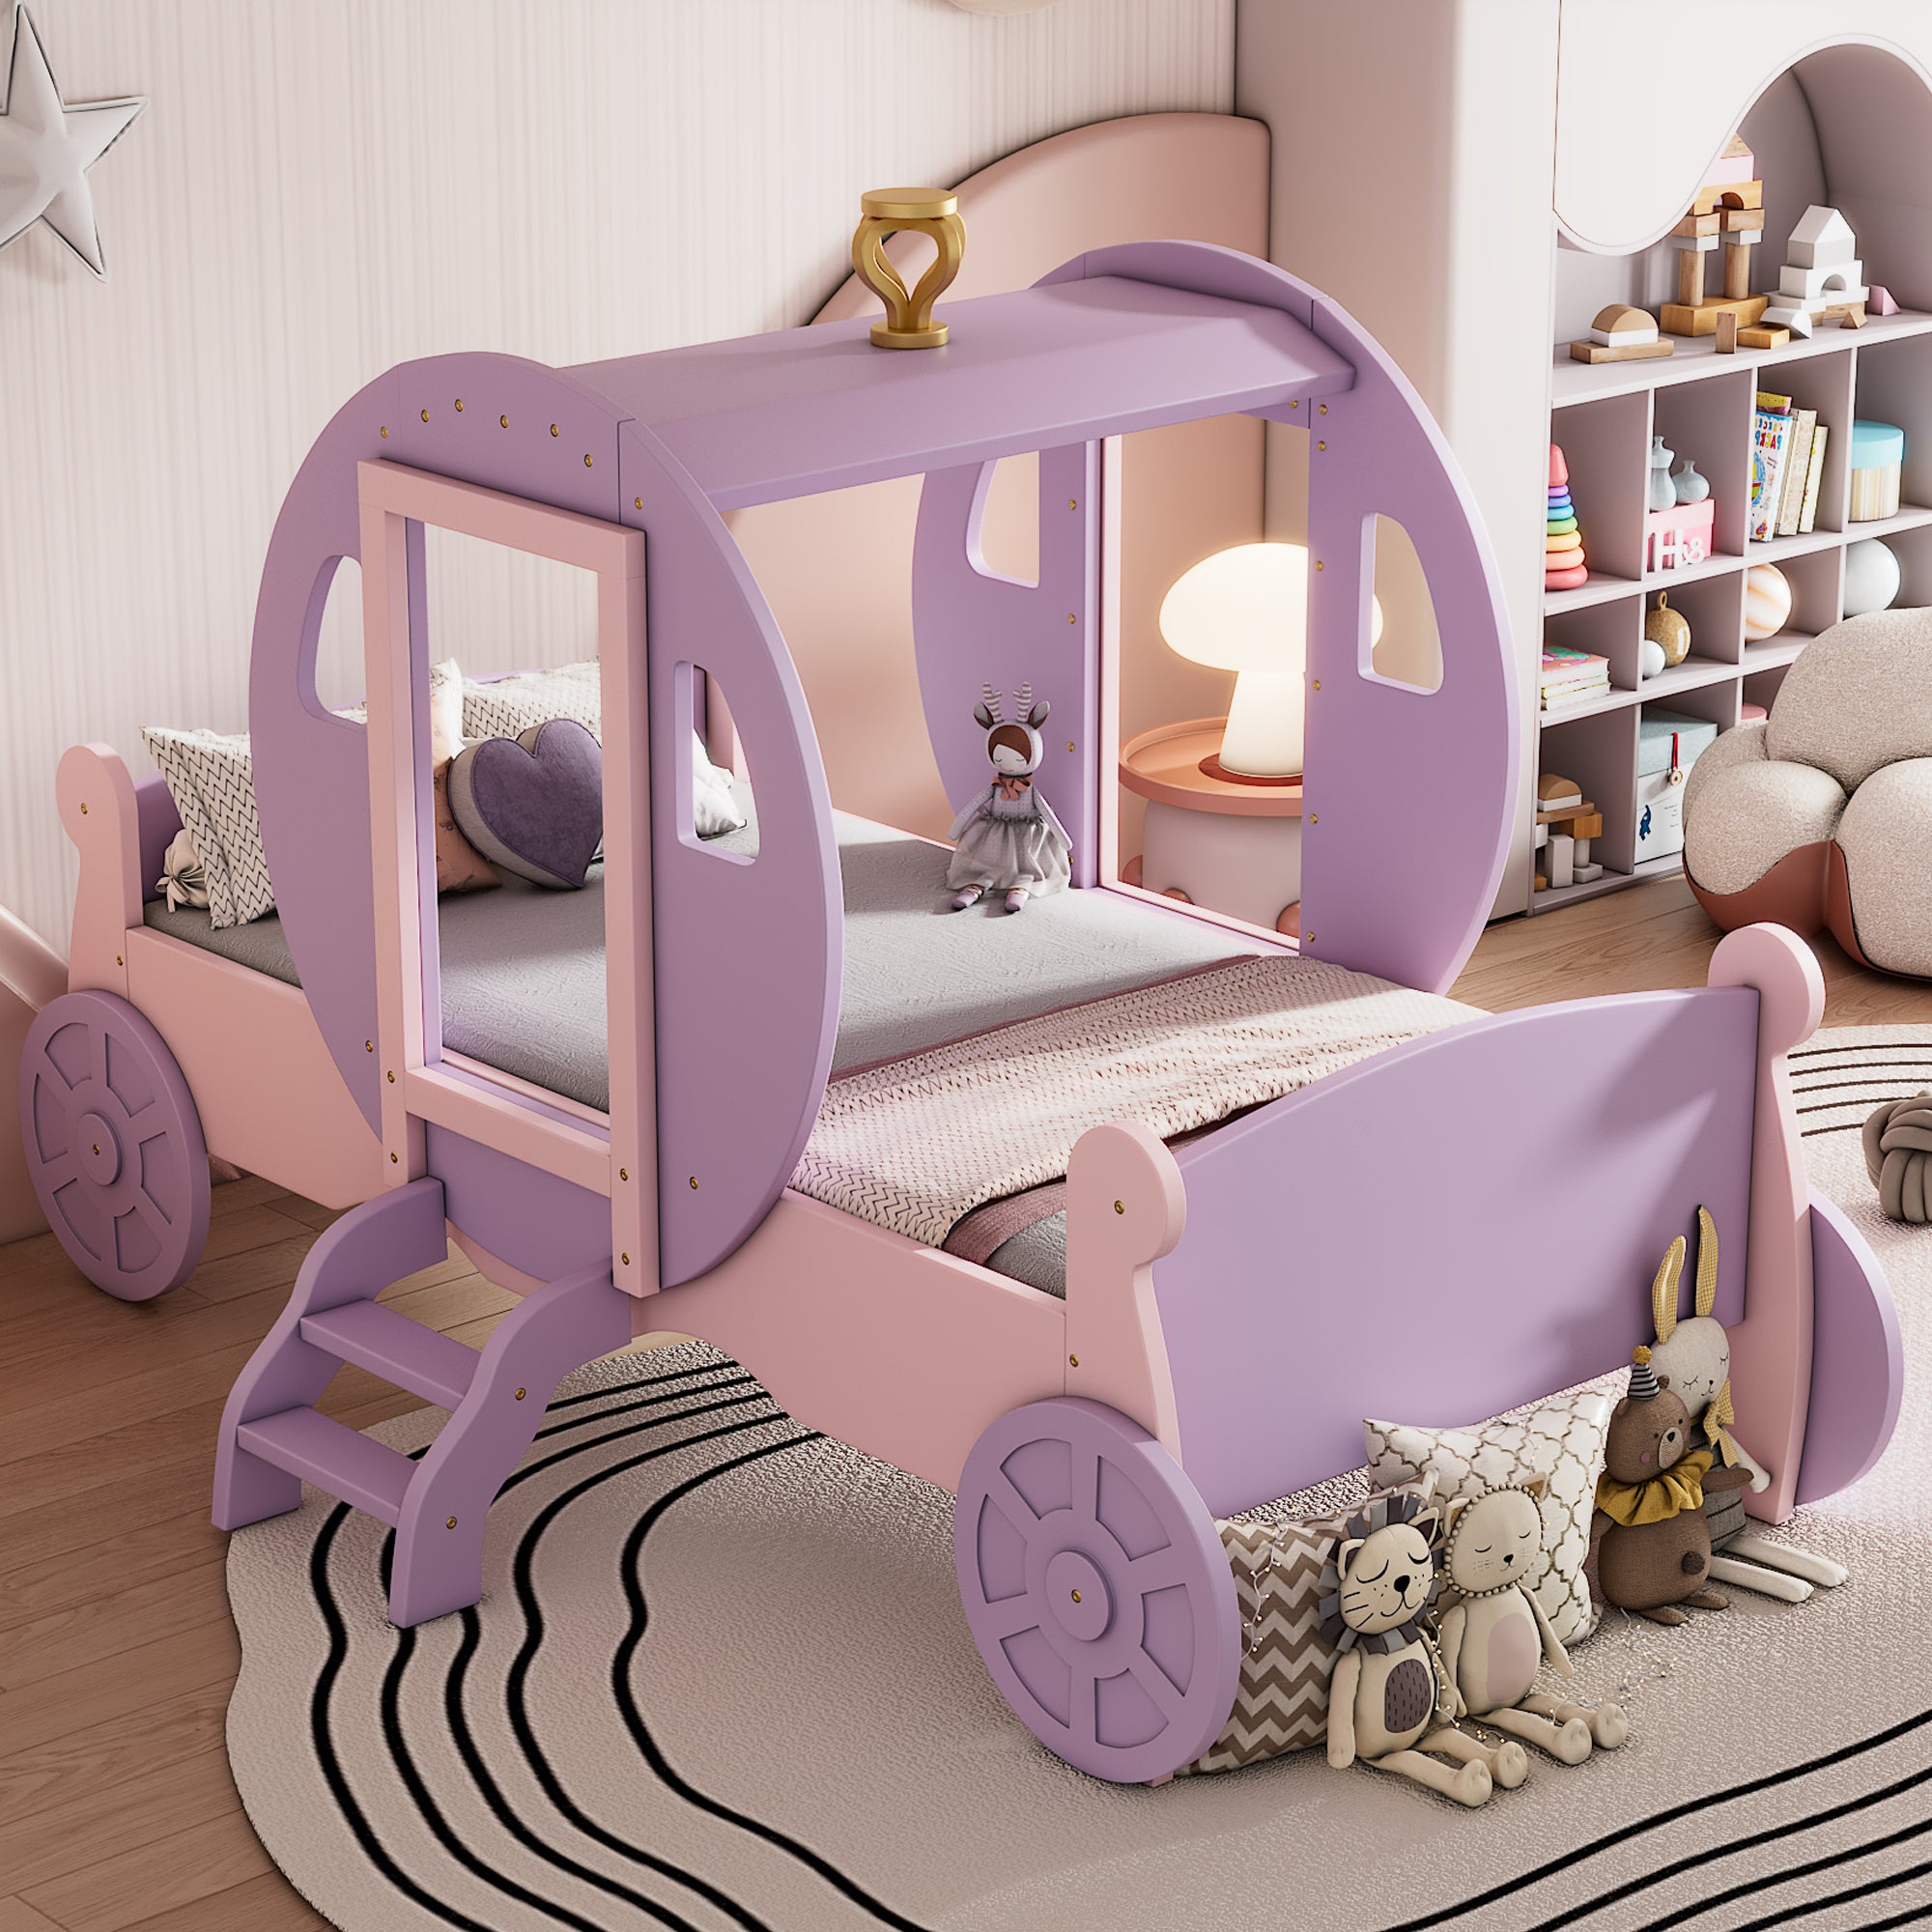 Twin size Wood Platform Car Bed with Stair,Princess Carriage Bed with Crown